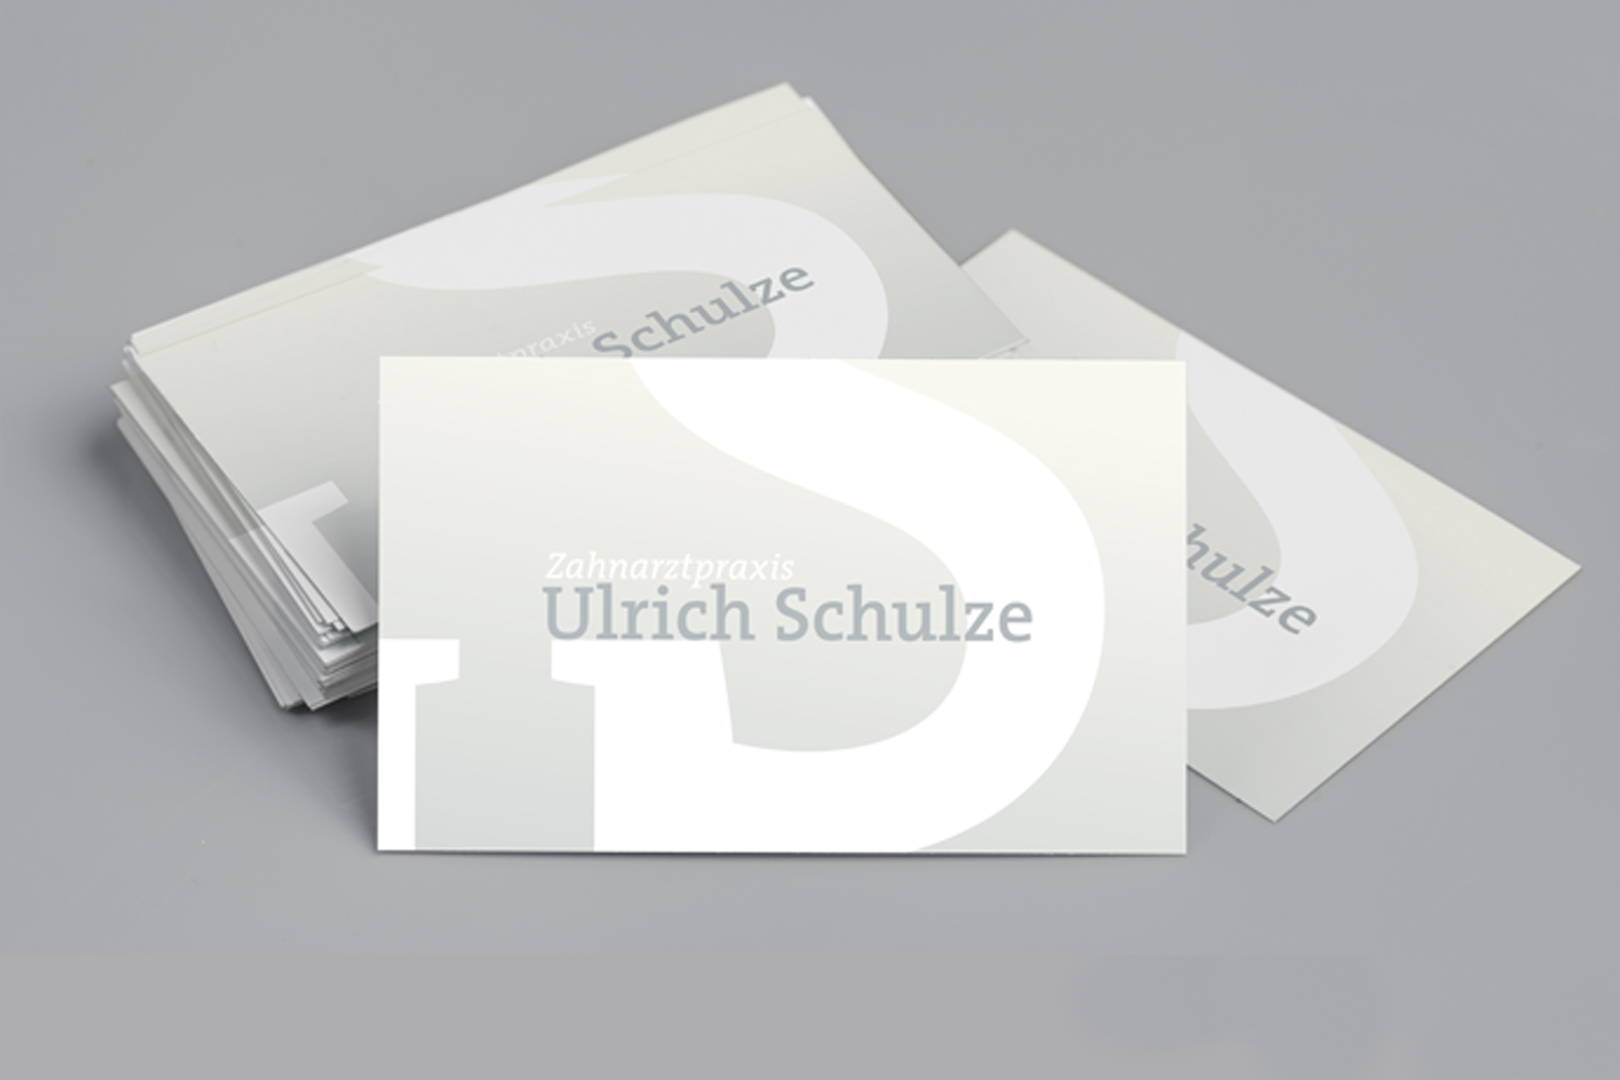 stack of business cards for ulrich schulze dental practice on gray background